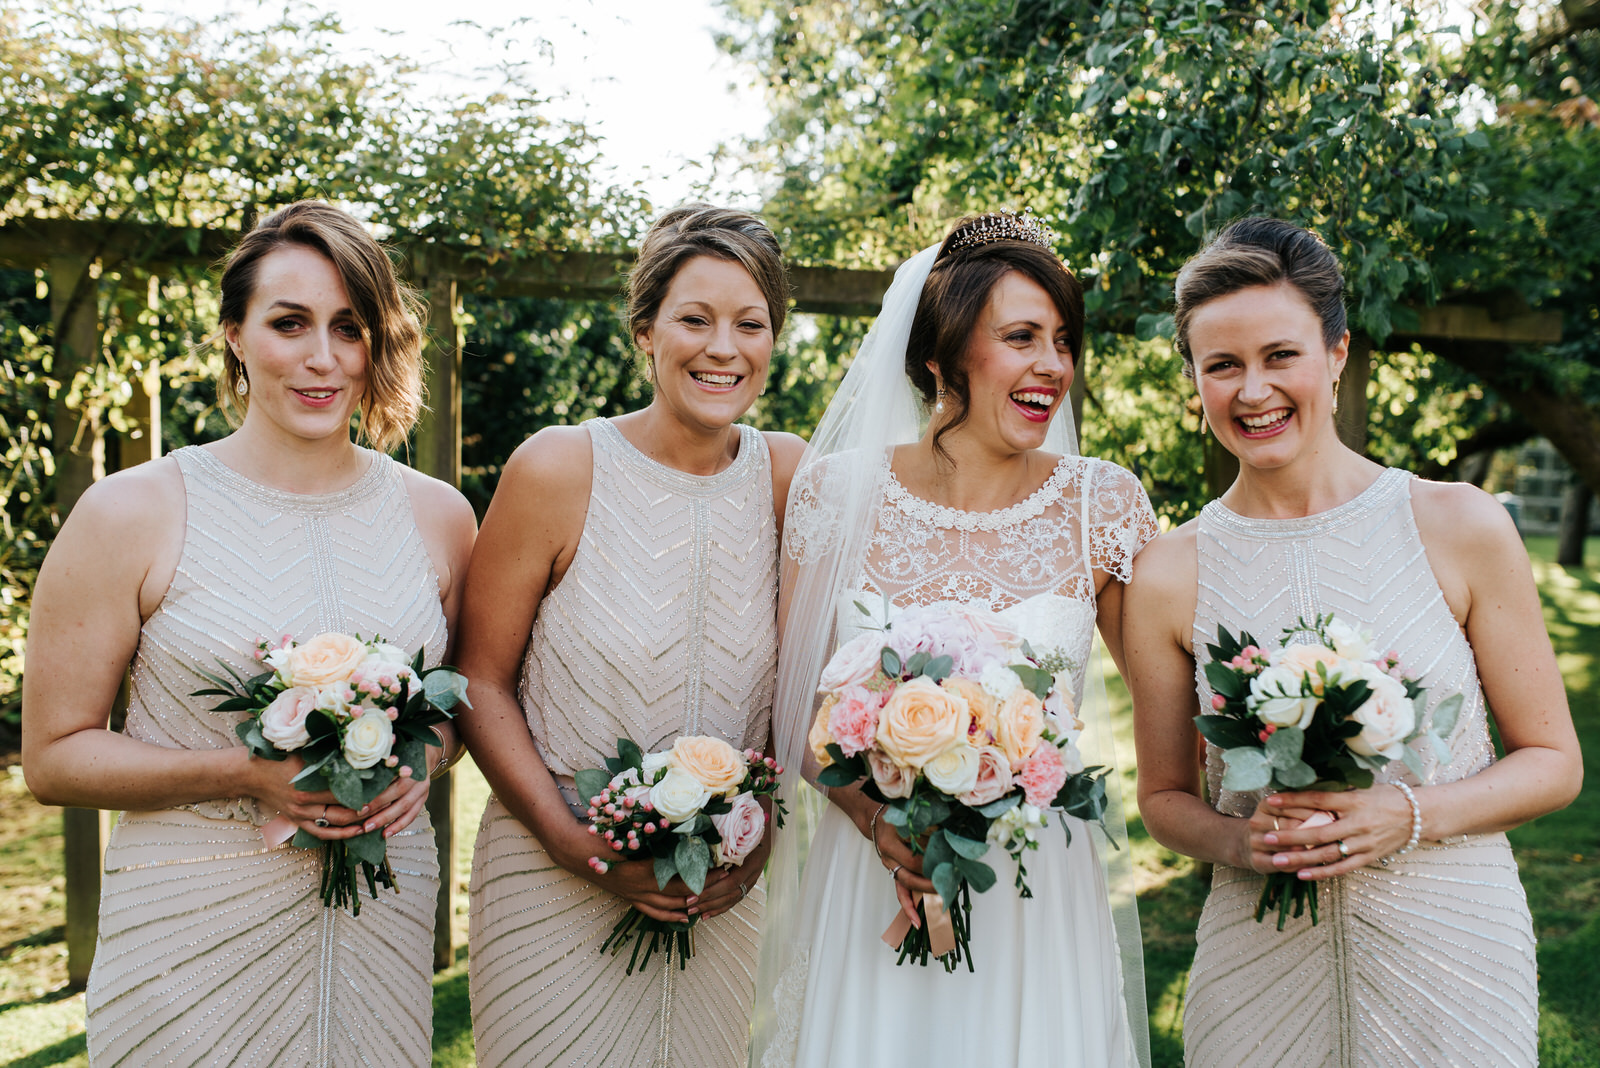 Bride and Bridesmaids smile at camera in stunning garden